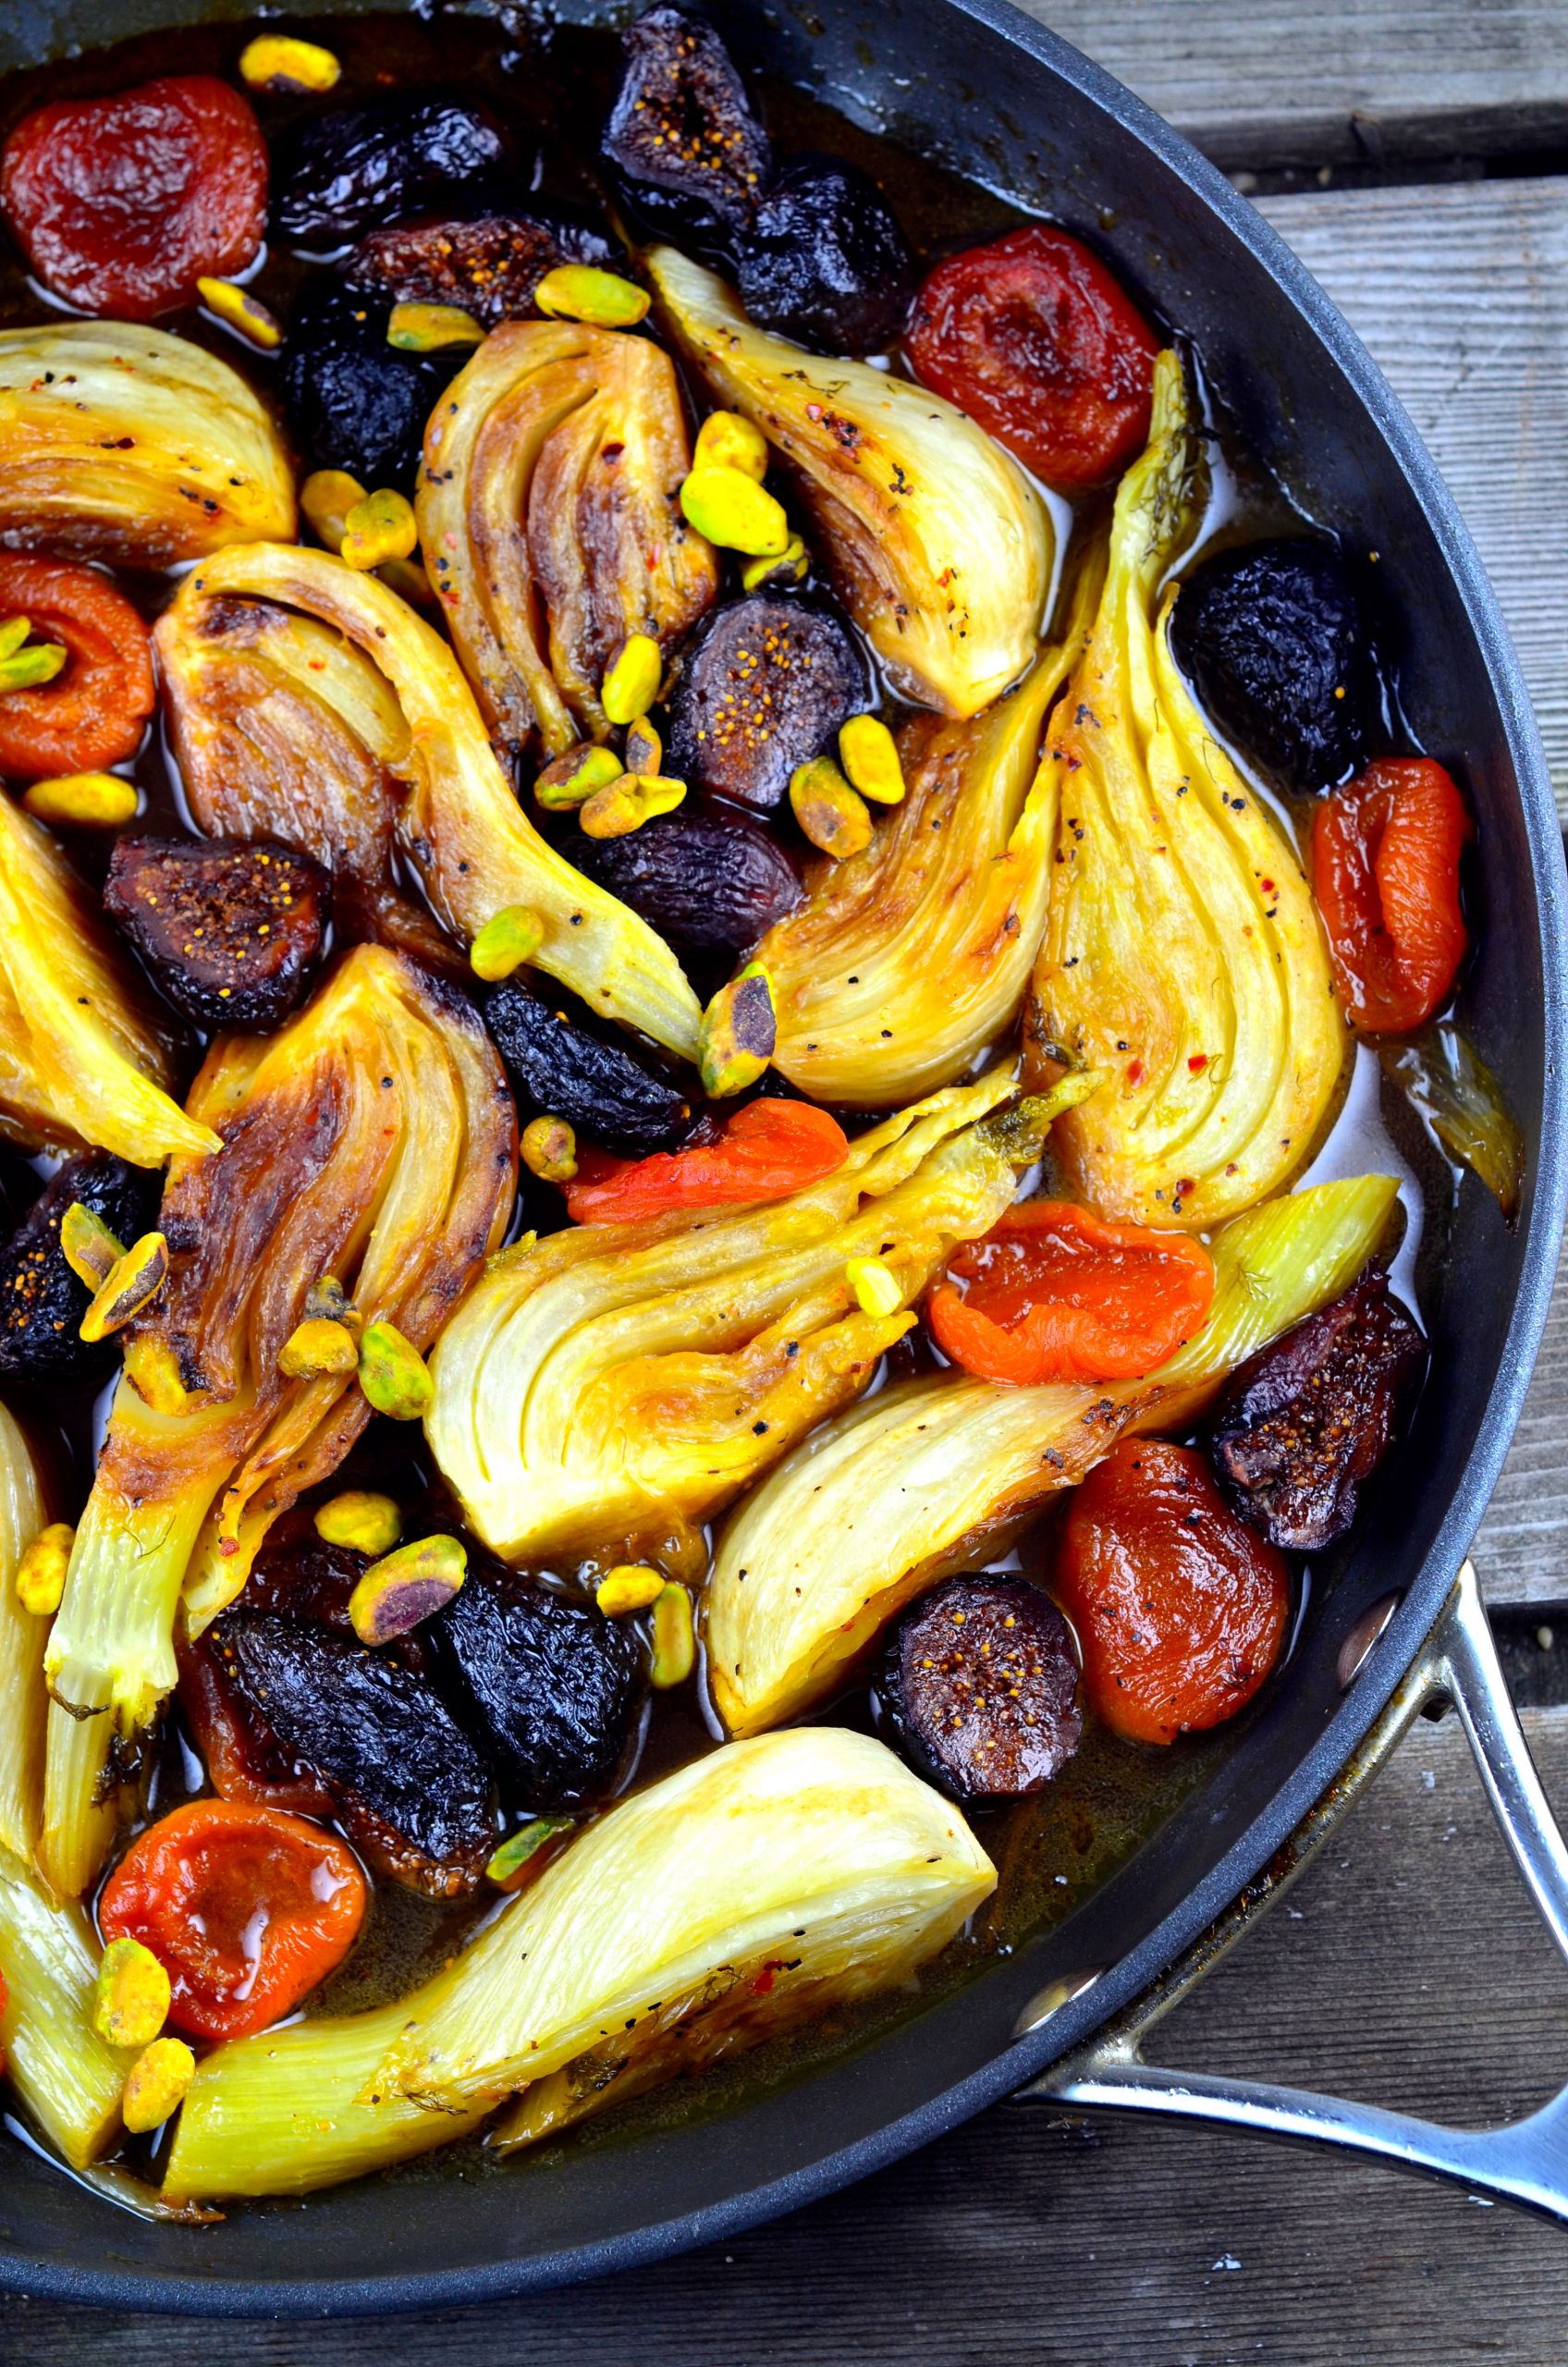 Vegetarian Passover Recipes
 Passover Recipes Braised Fennel with Apricots and Figs